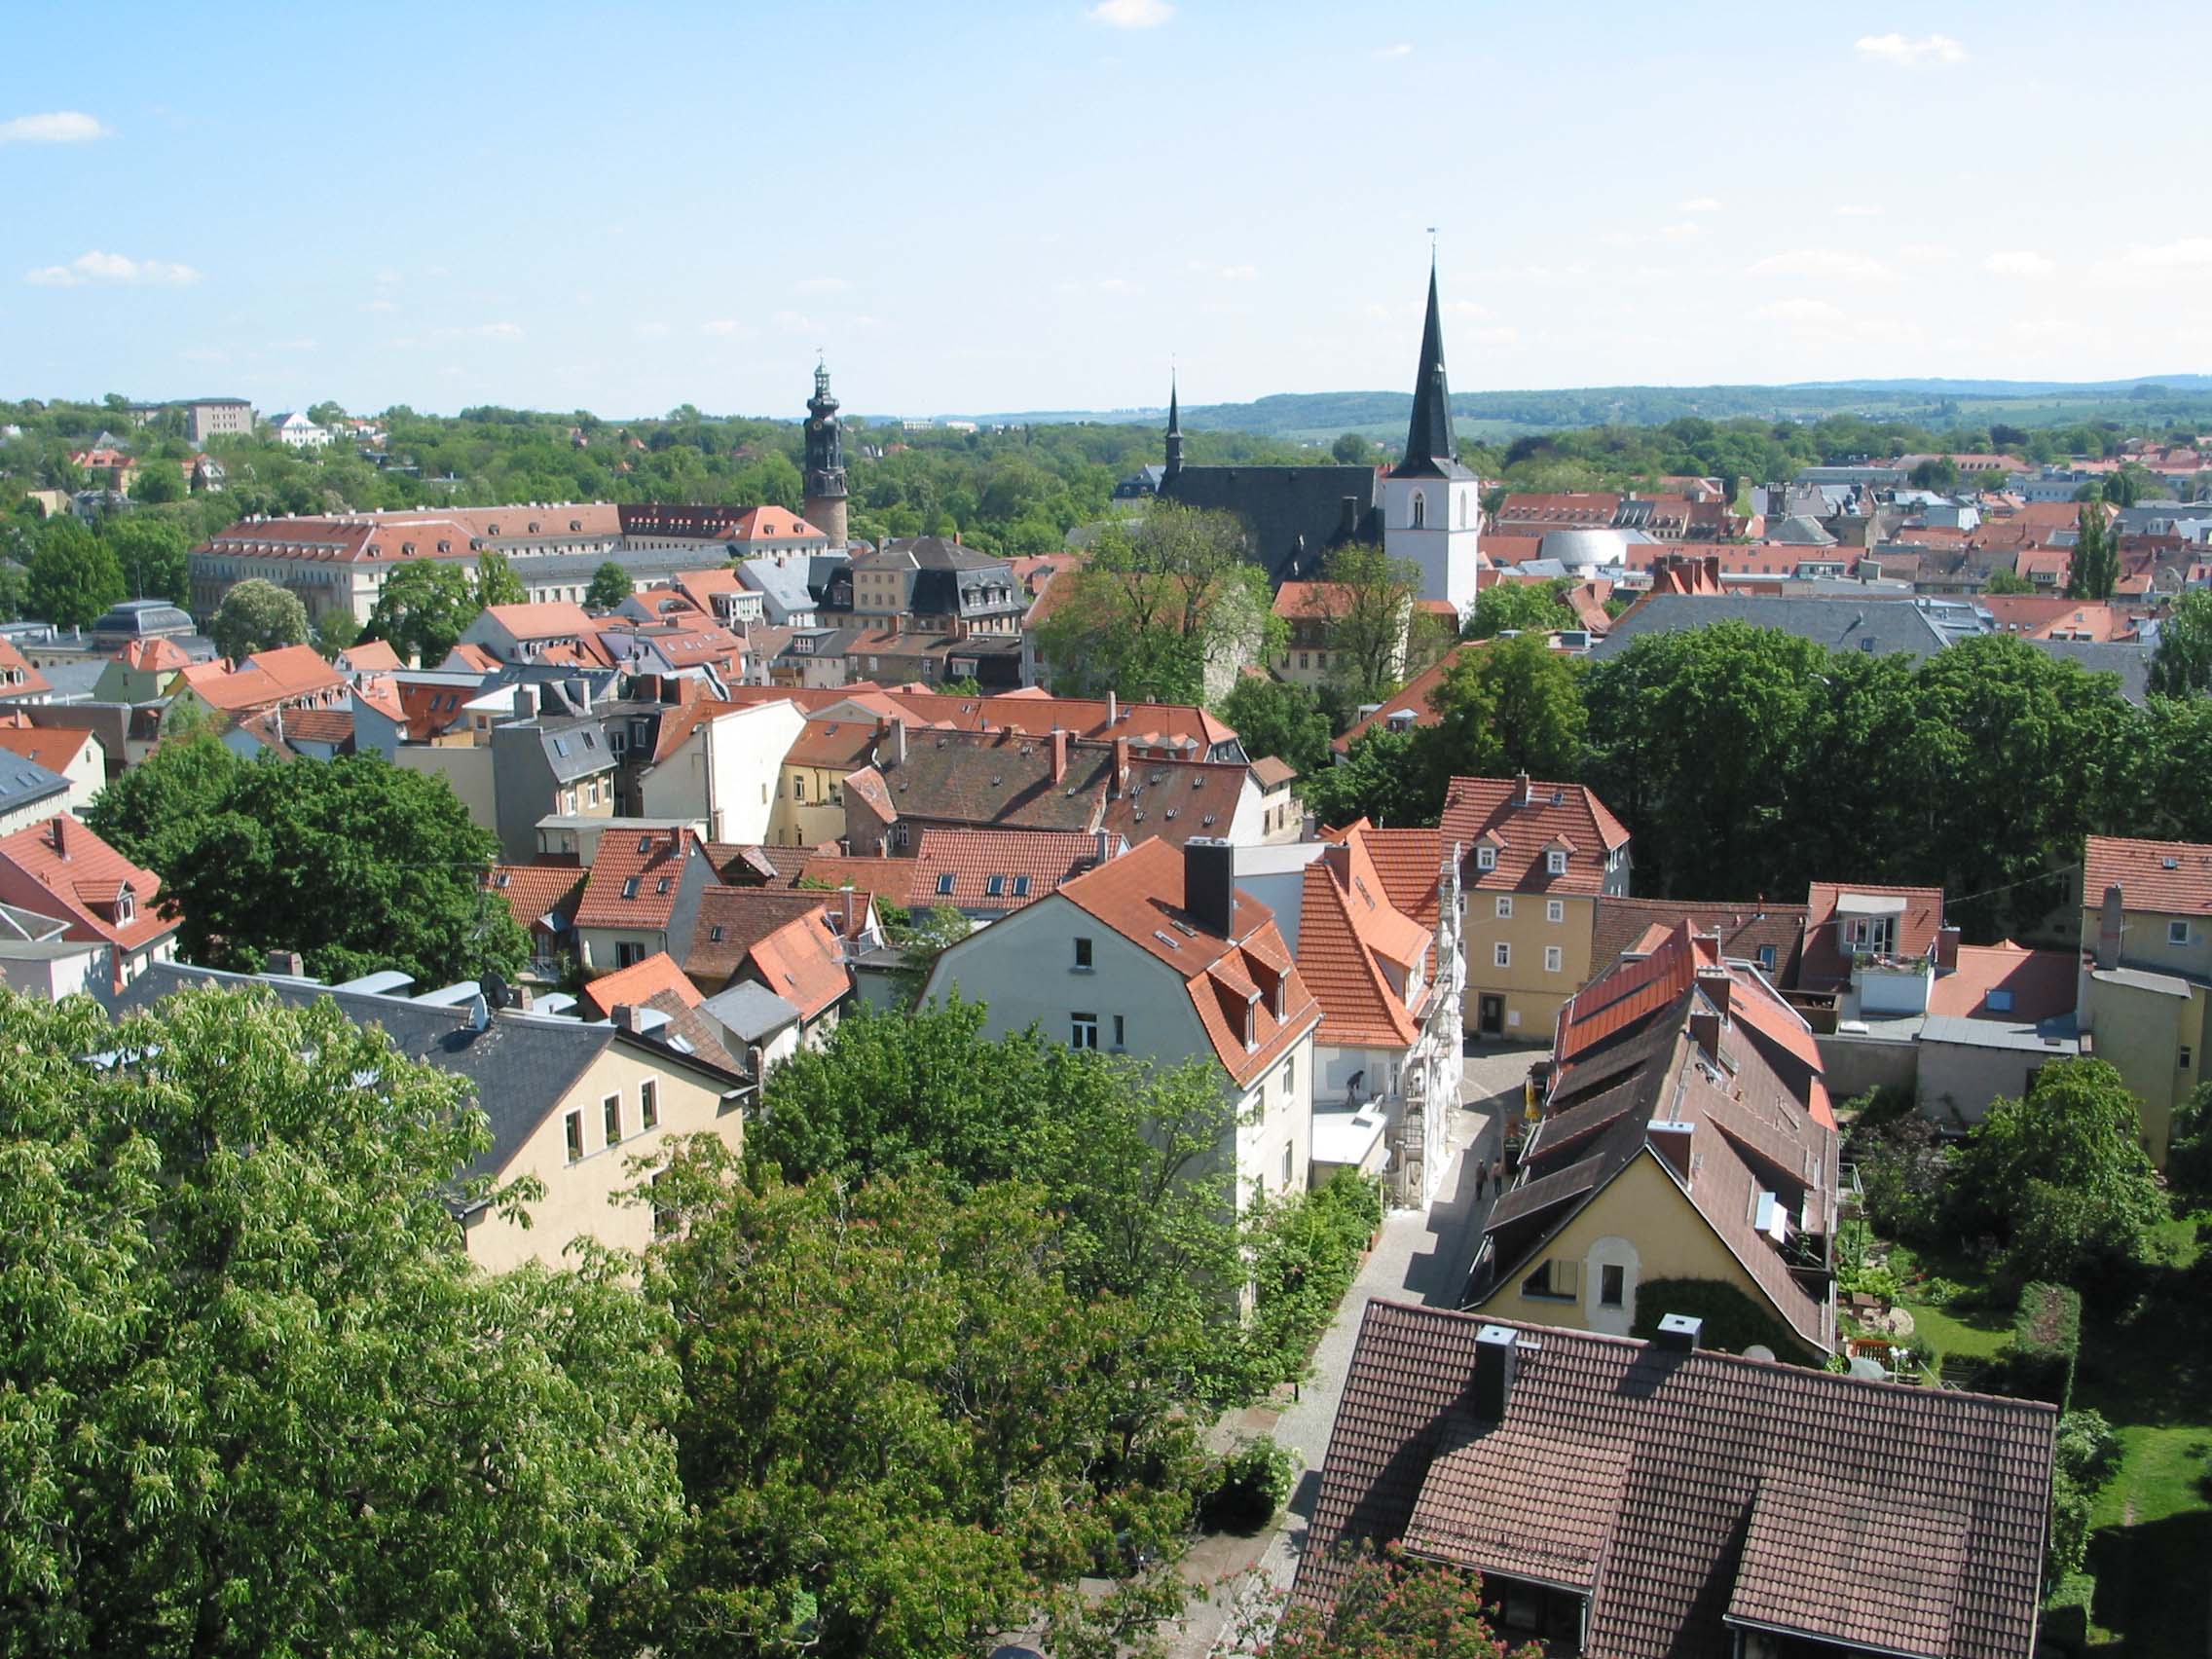 View of Weimar with the Herderkirche and the Stadtschloss.